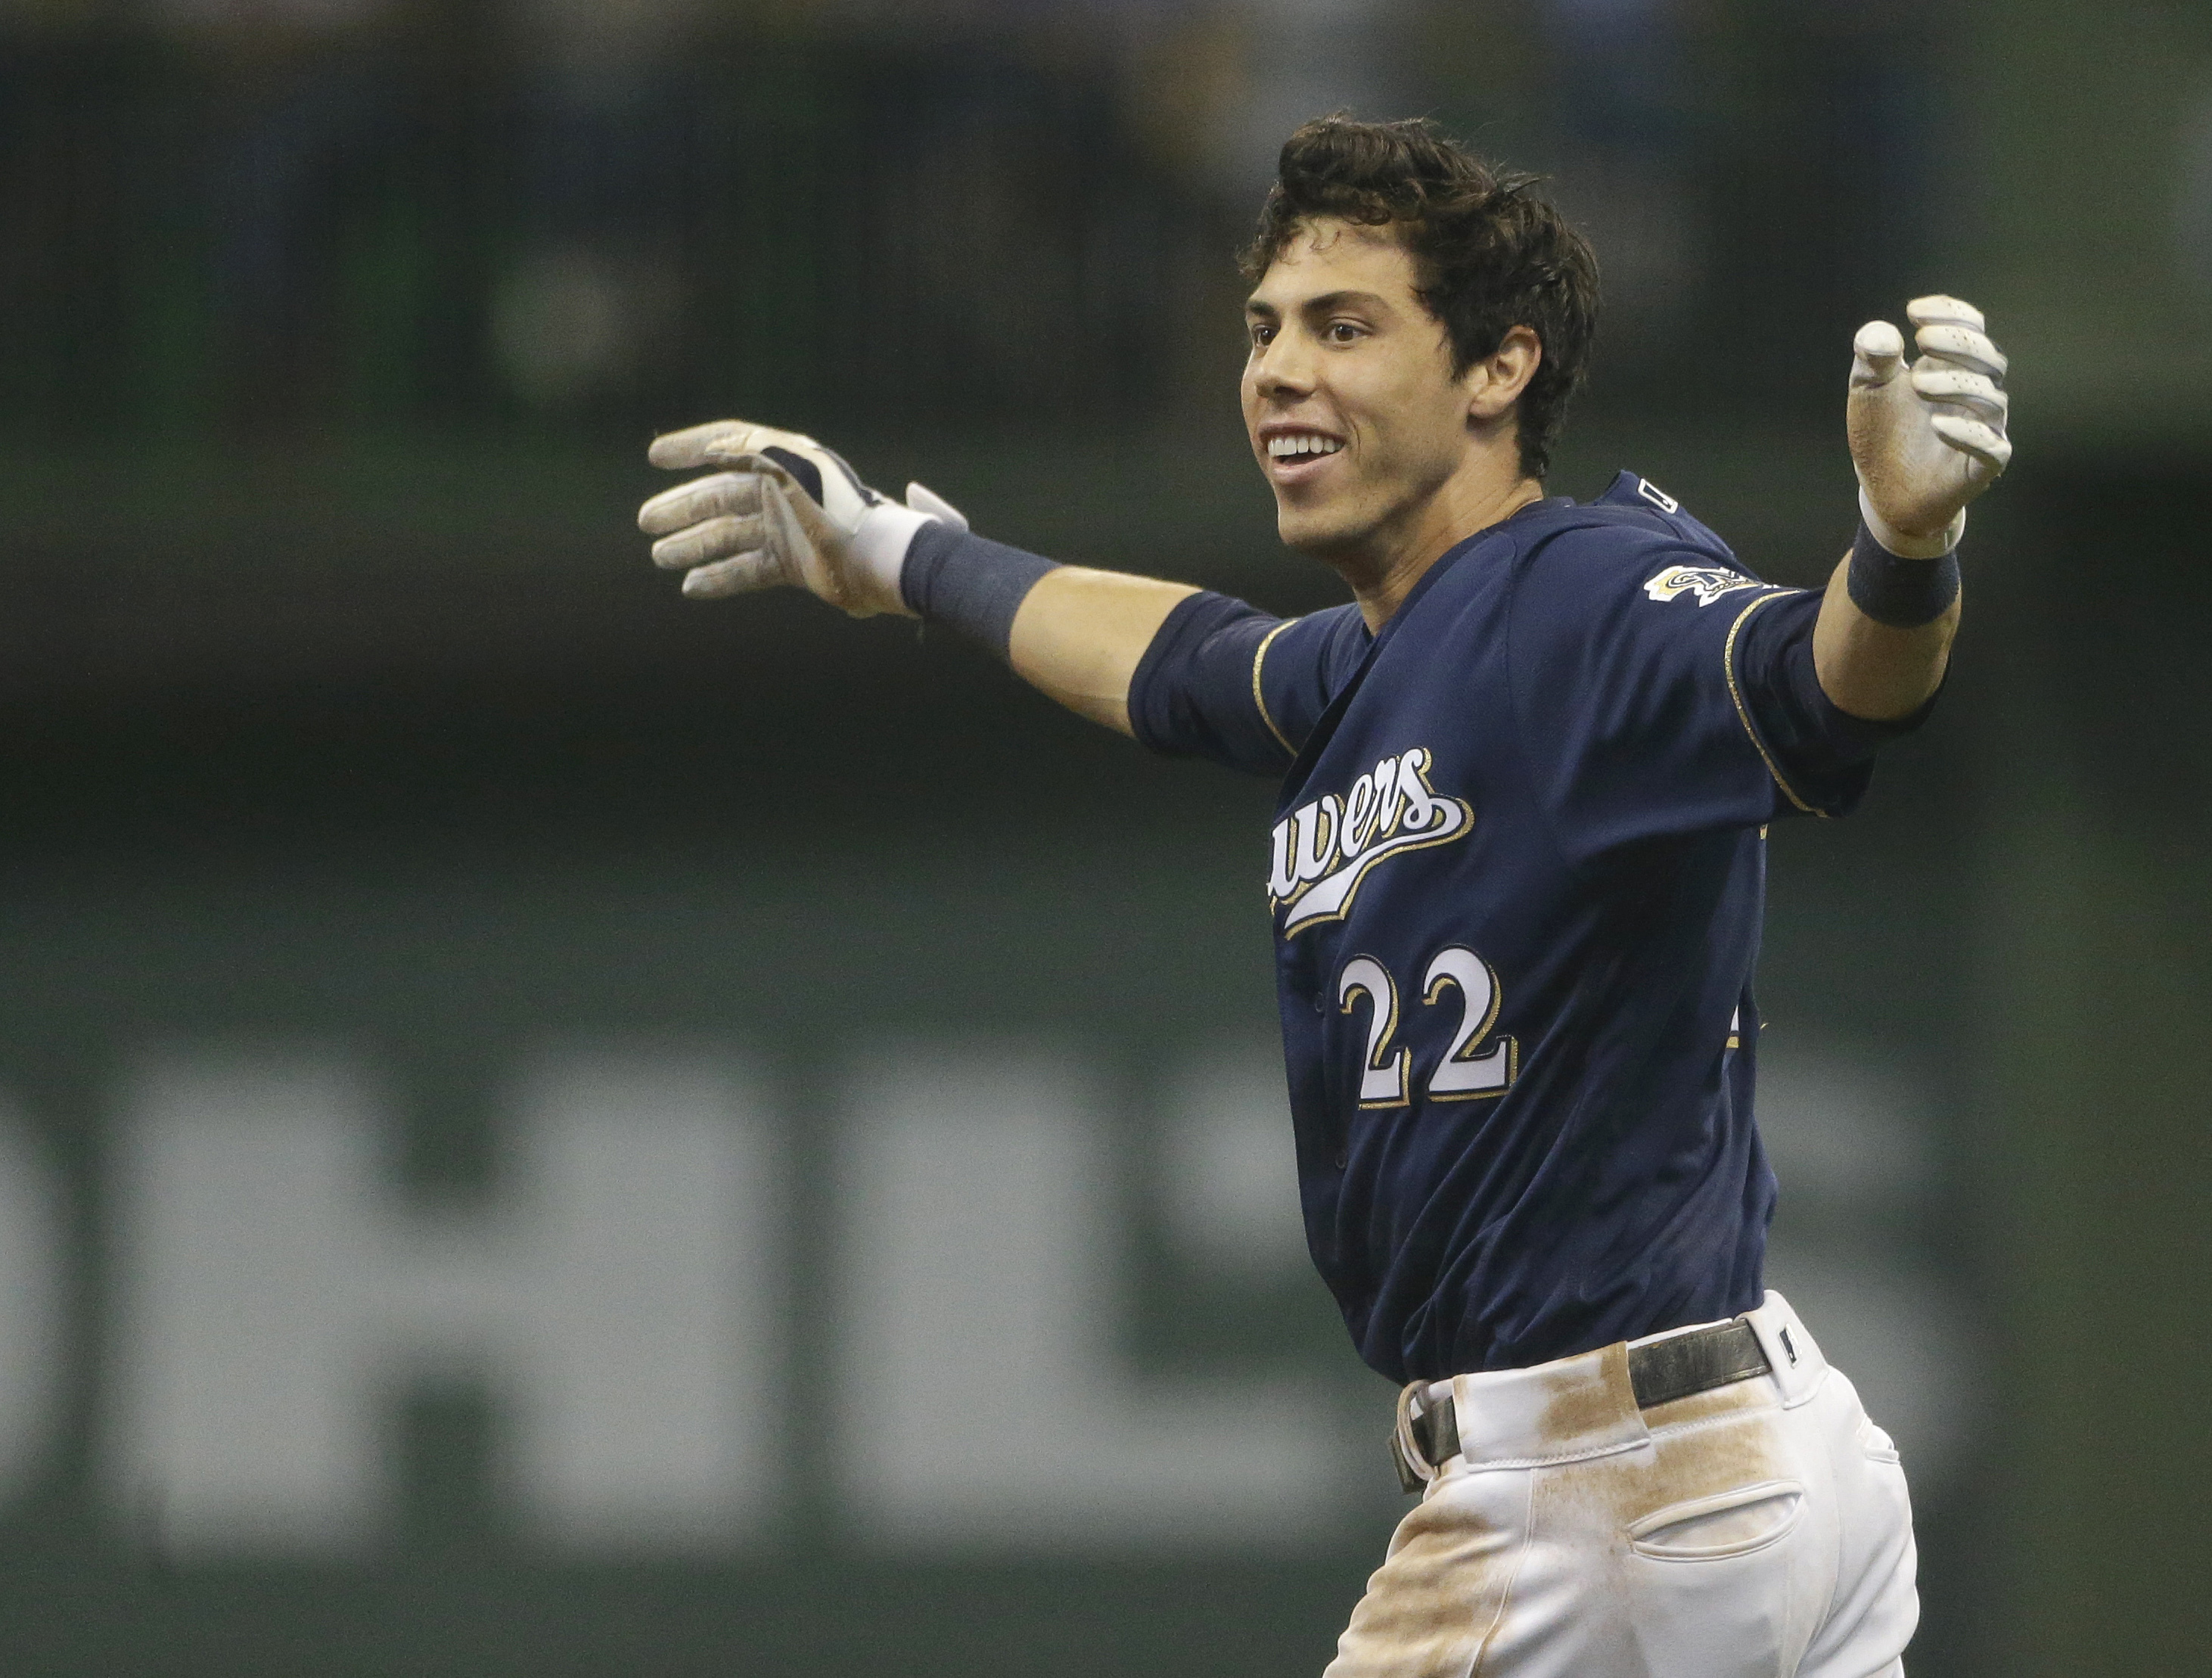 Yelich beats throw to 1st in 9th, Brewers beat Cubs 4-3